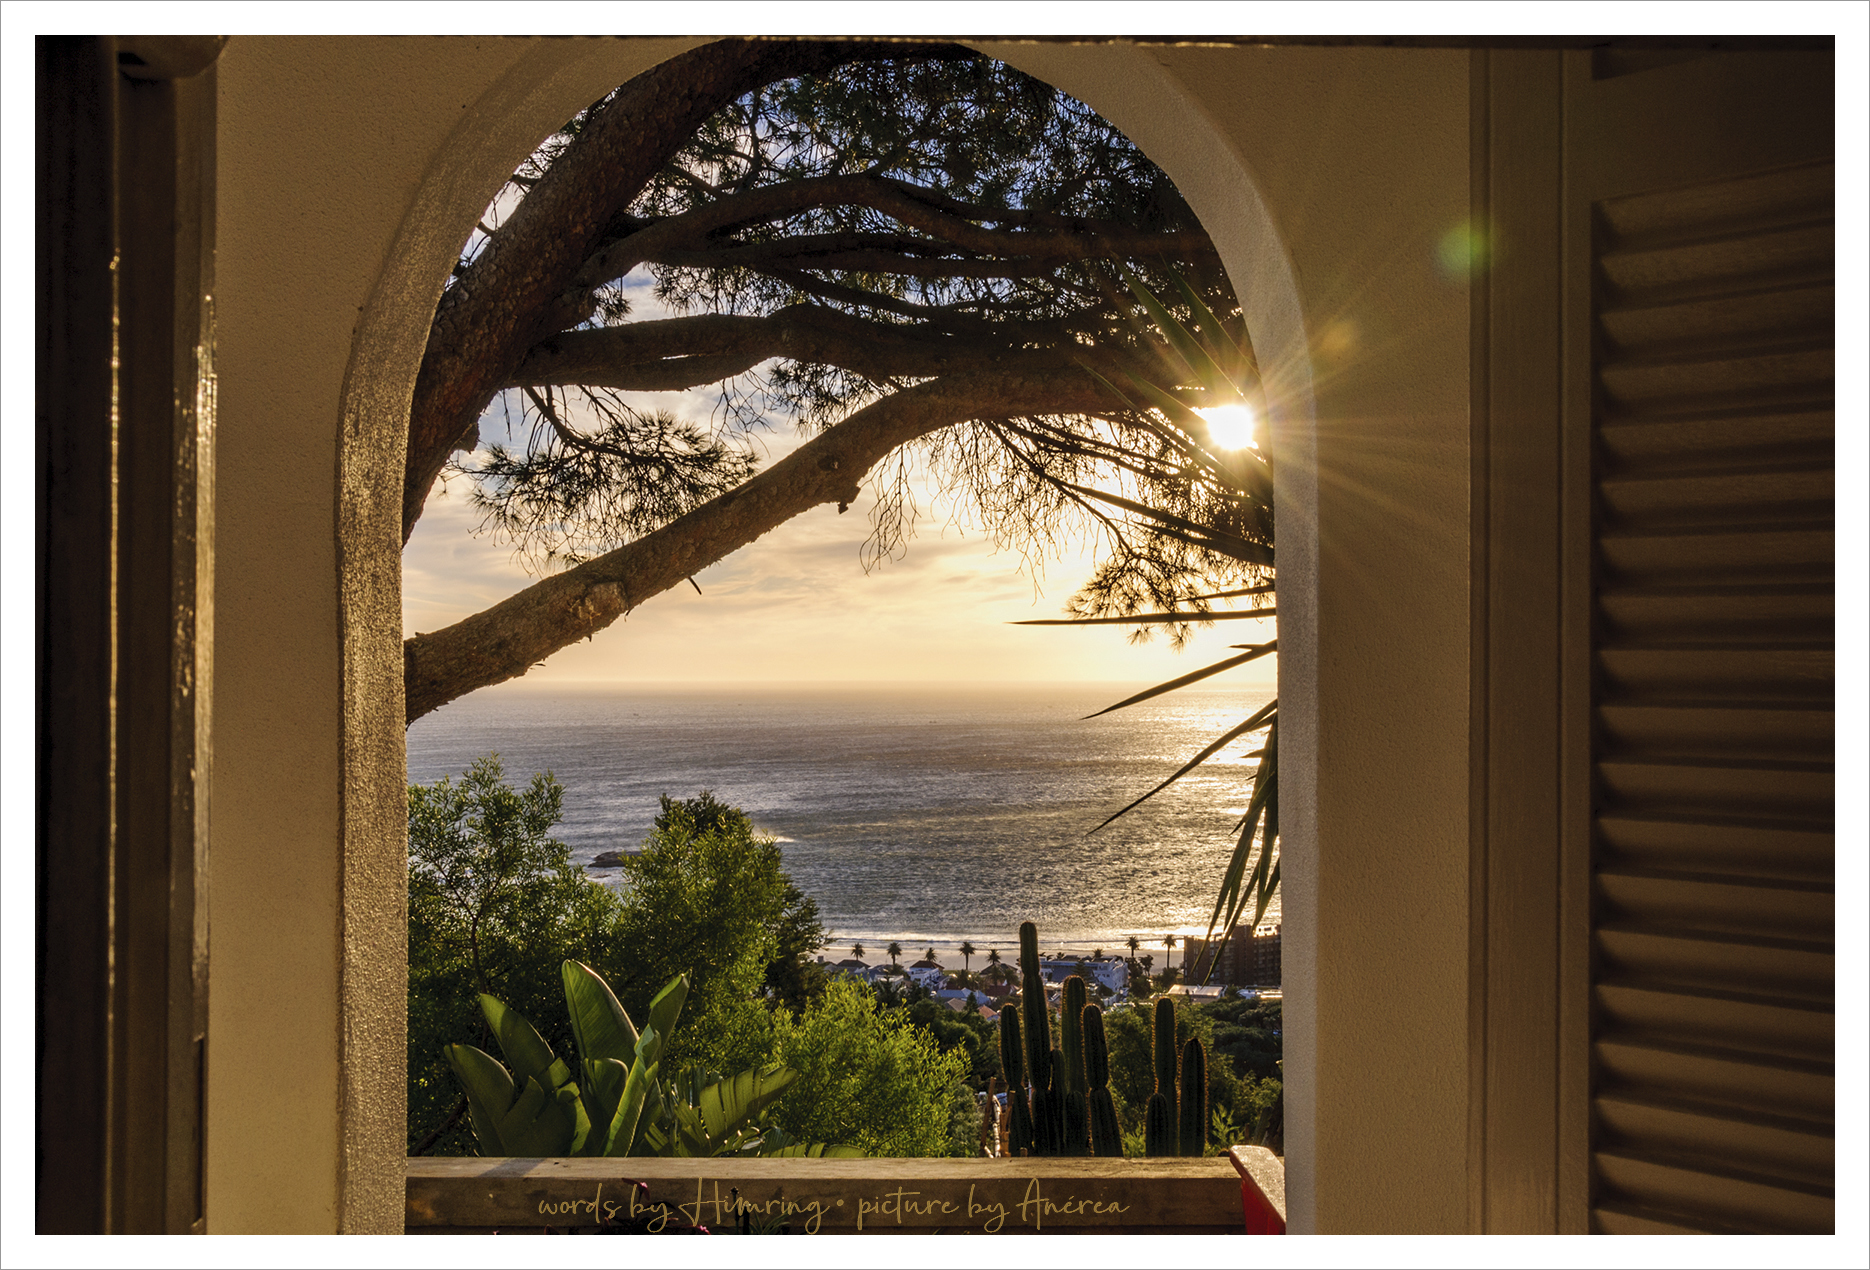 a window opens onto the ocean with the sun peeking through branches overhanging the opening; beyond is greenery leading down to the beach and open water